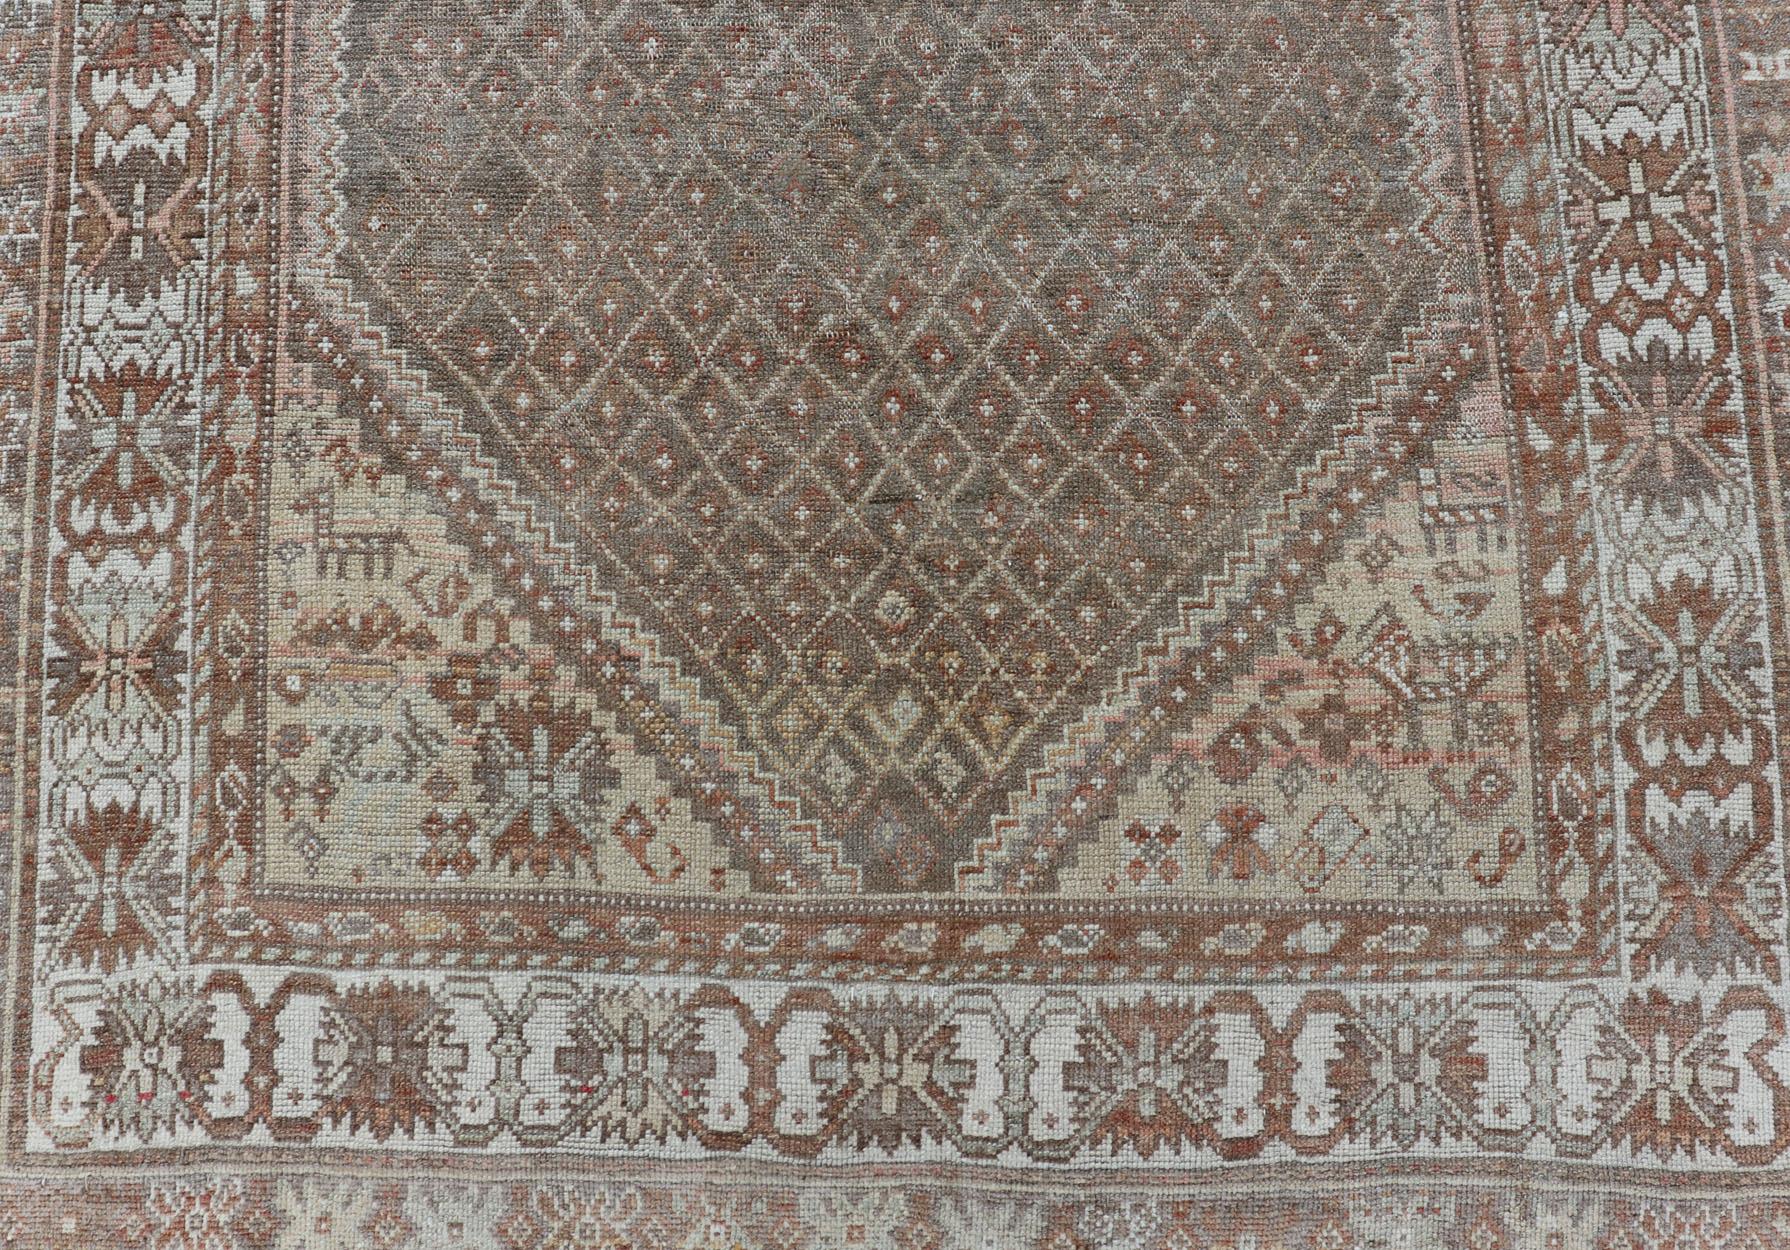 Antique Persian Kurdish Rug in Gray/Brown Background with Taupe Tan & Soft Red  In Good Condition For Sale In Atlanta, GA